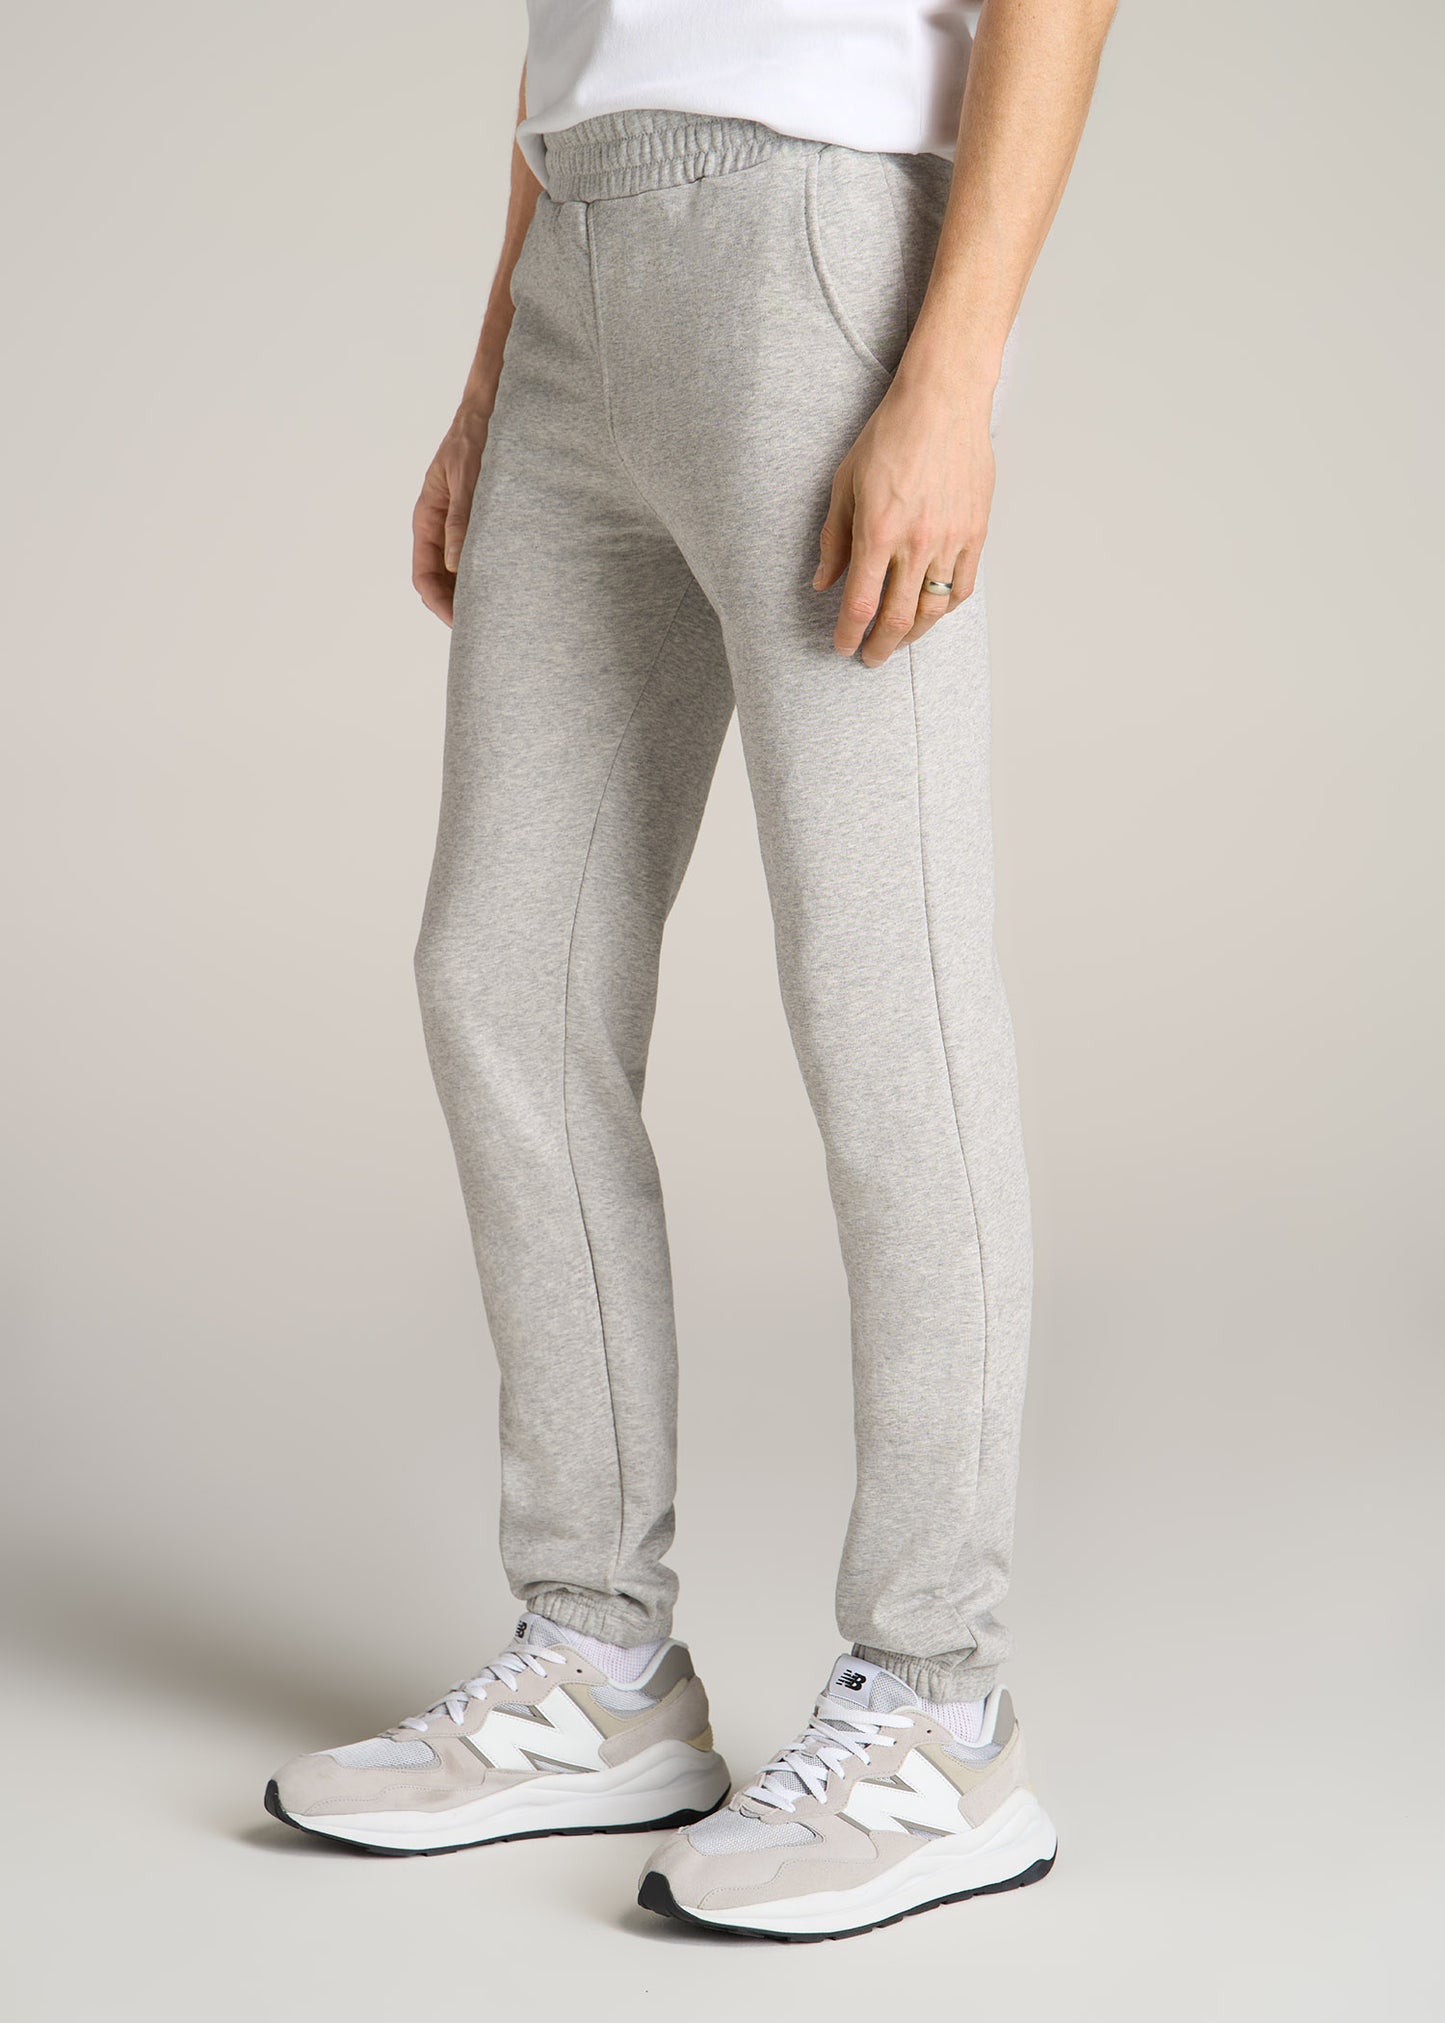 American-Tall-Men-Wearever-French-Terry-Sweatpants-Grey-Mix-side